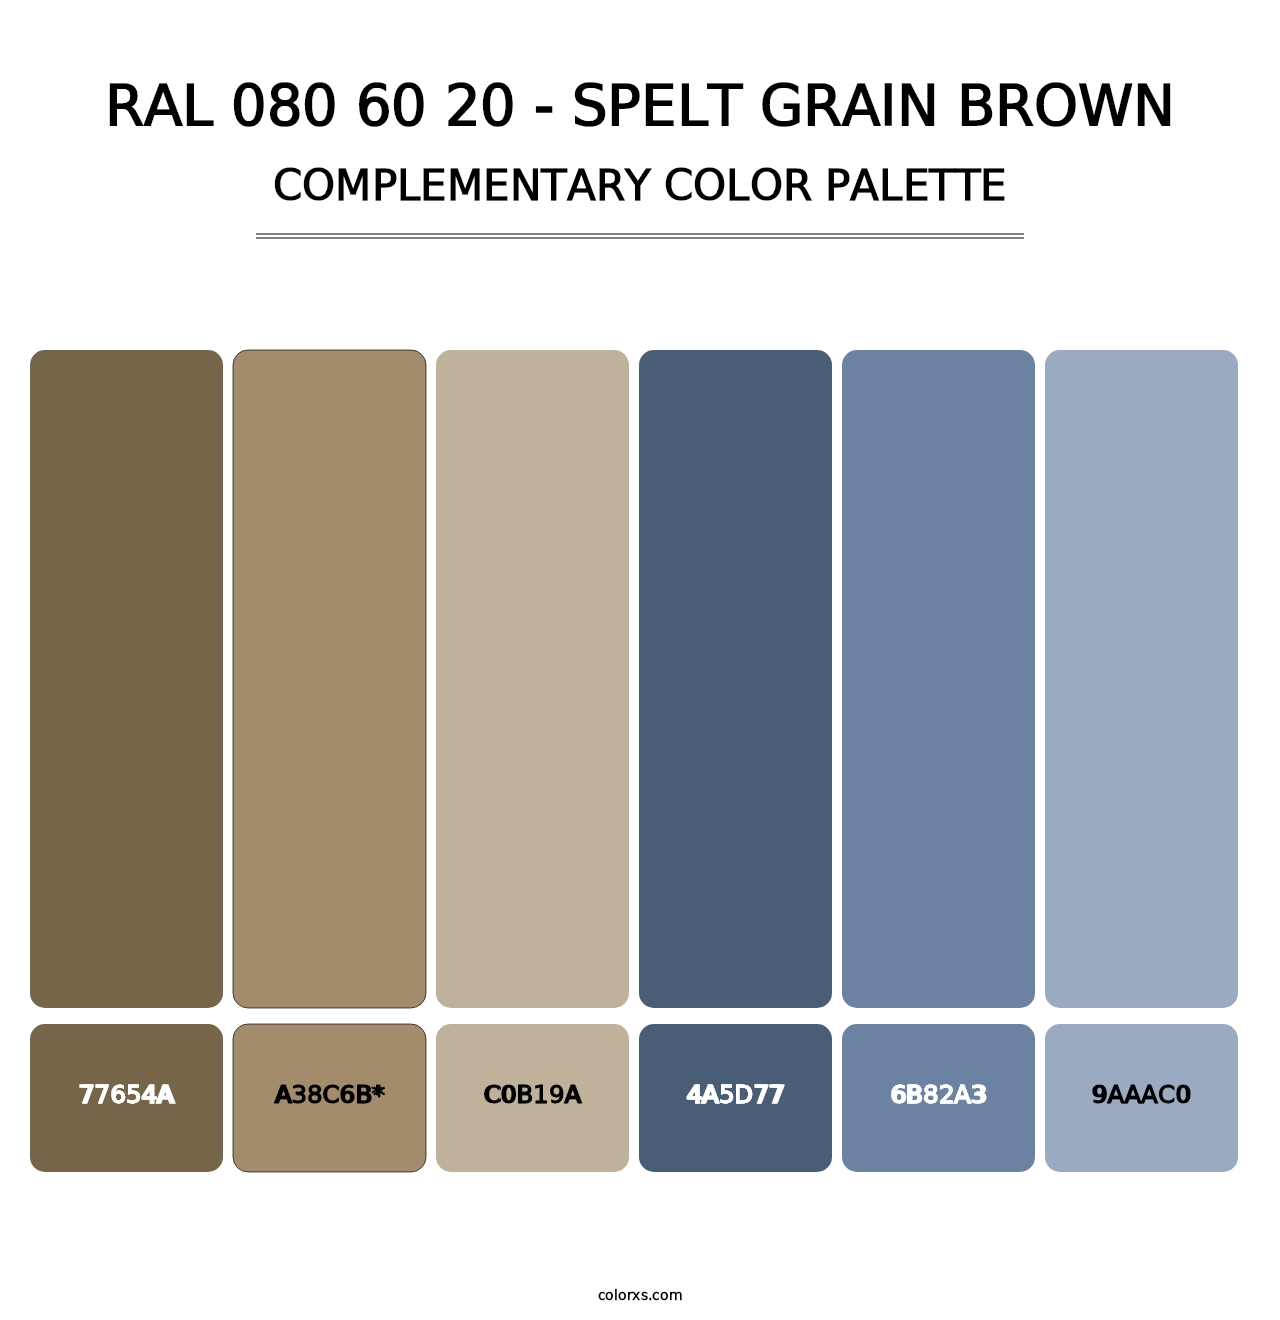 RAL 080 60 20 - Spelt Grain Brown - Complementary Color Palette